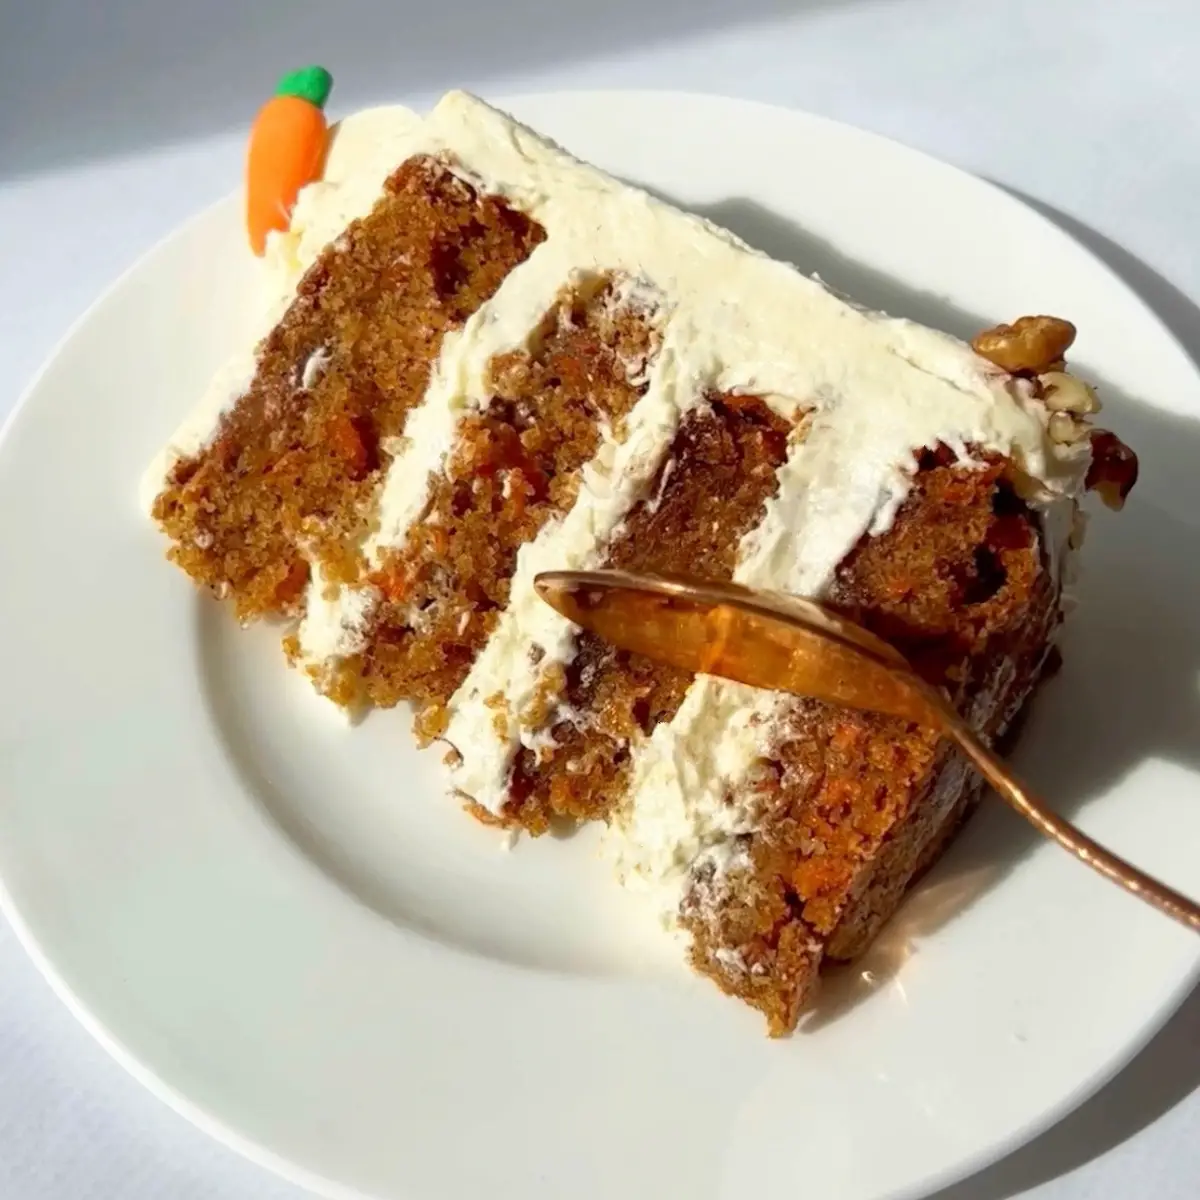 work with me on carrot cake